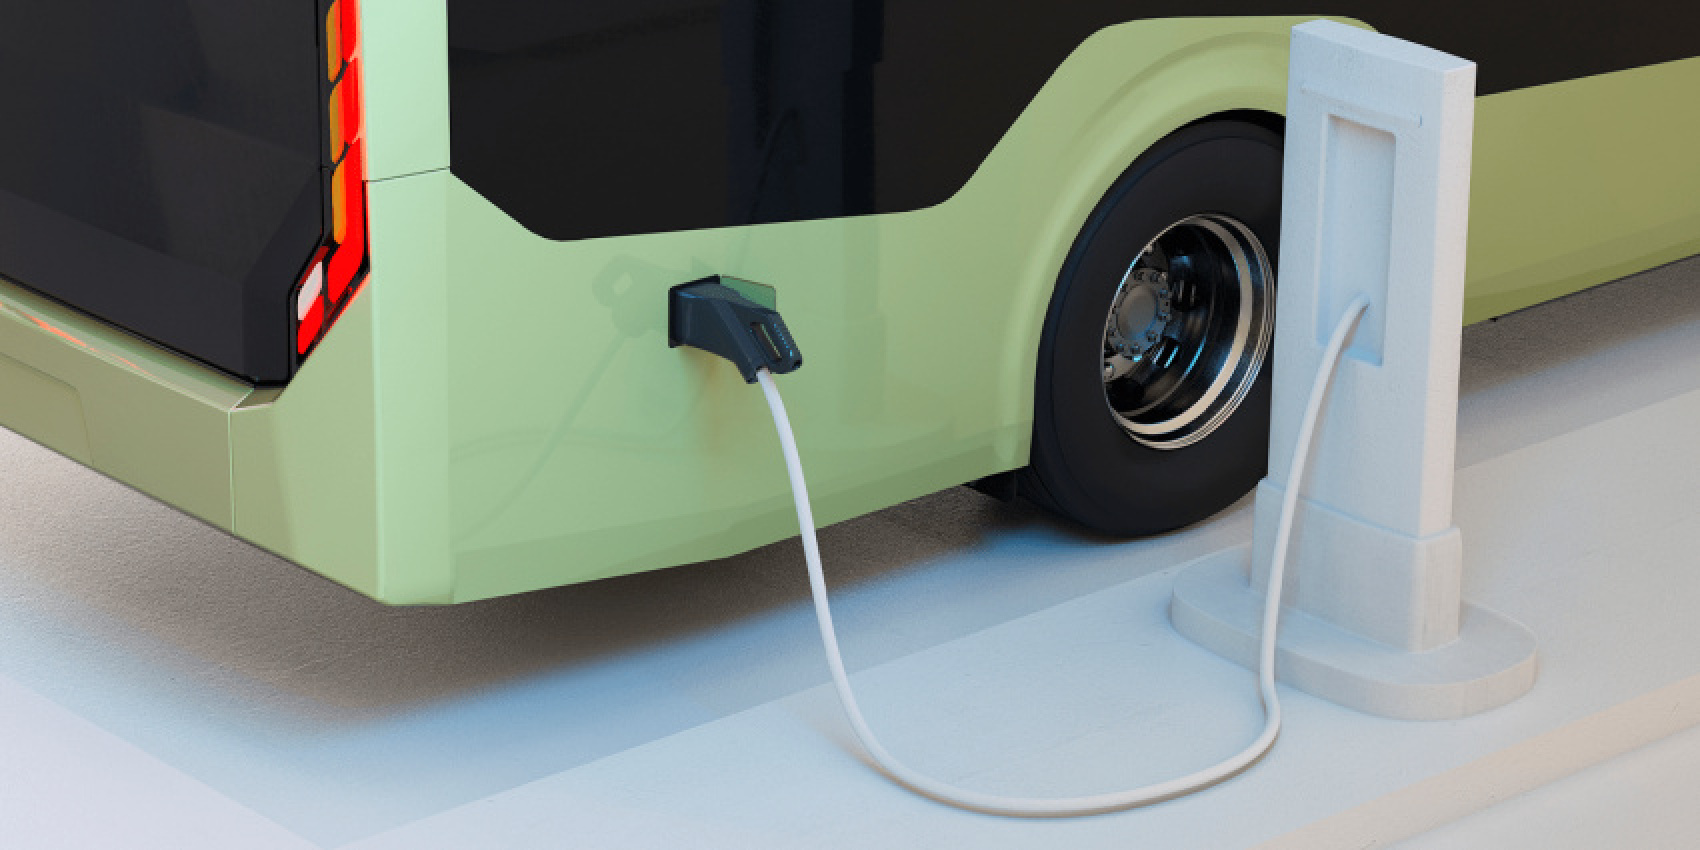 autos, cars, electric vehicle, fleets, autoguidovie, electric buses, europe, italy, public transport, autoguidovie launches tender for electric buses in italy